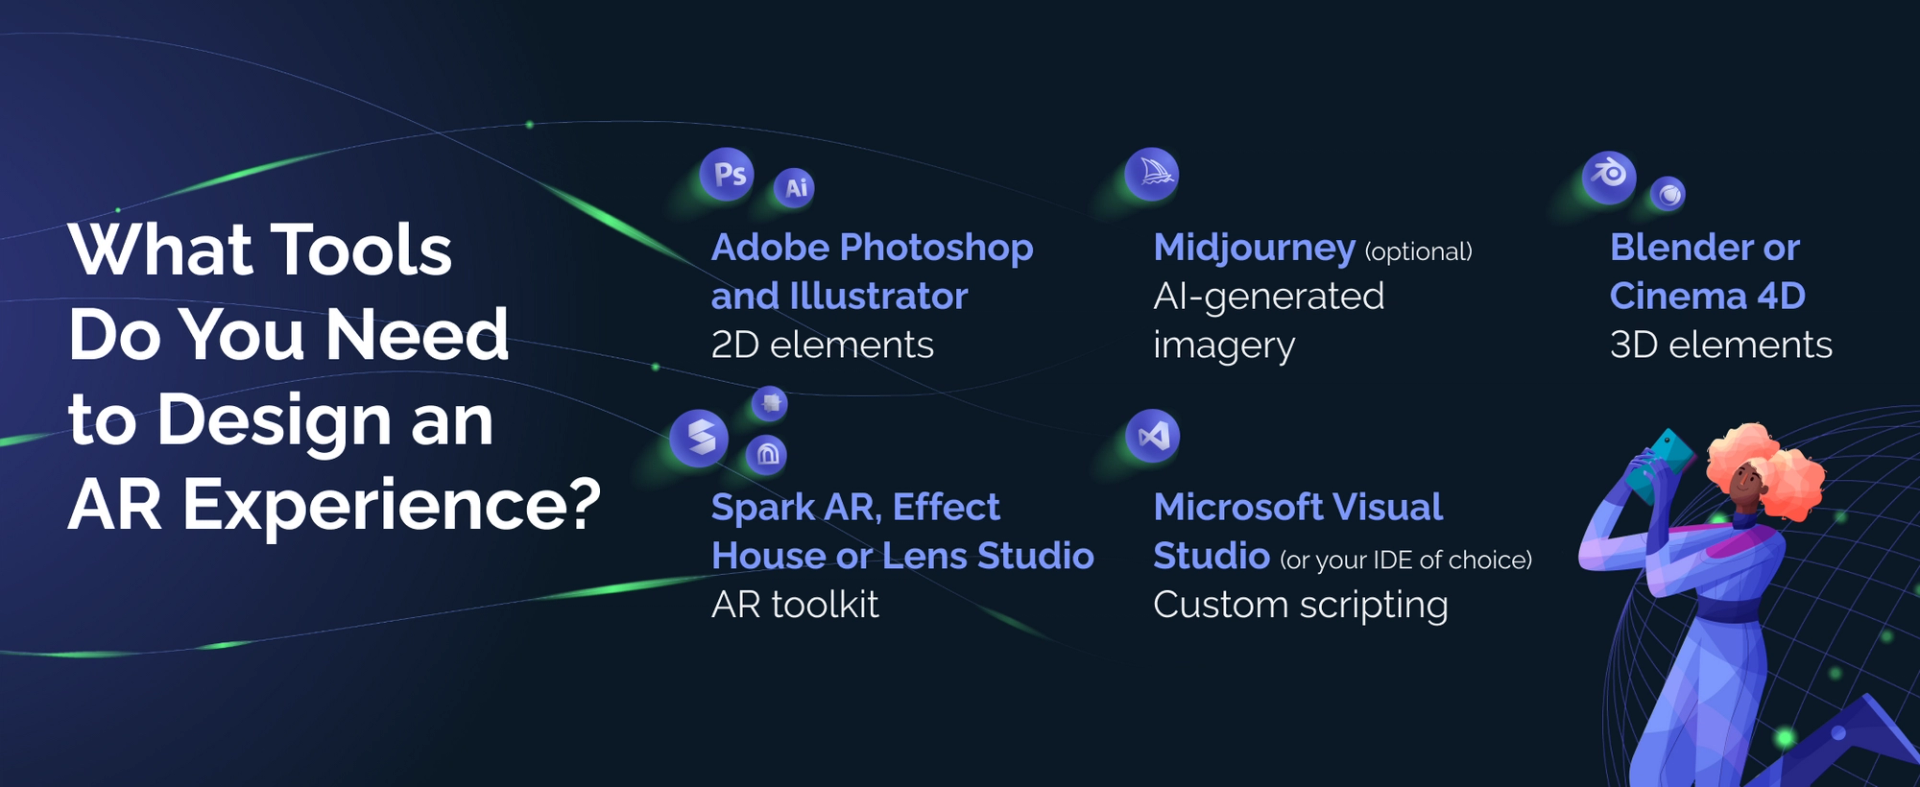 What Tools Do You Need to Design an AR Experience?